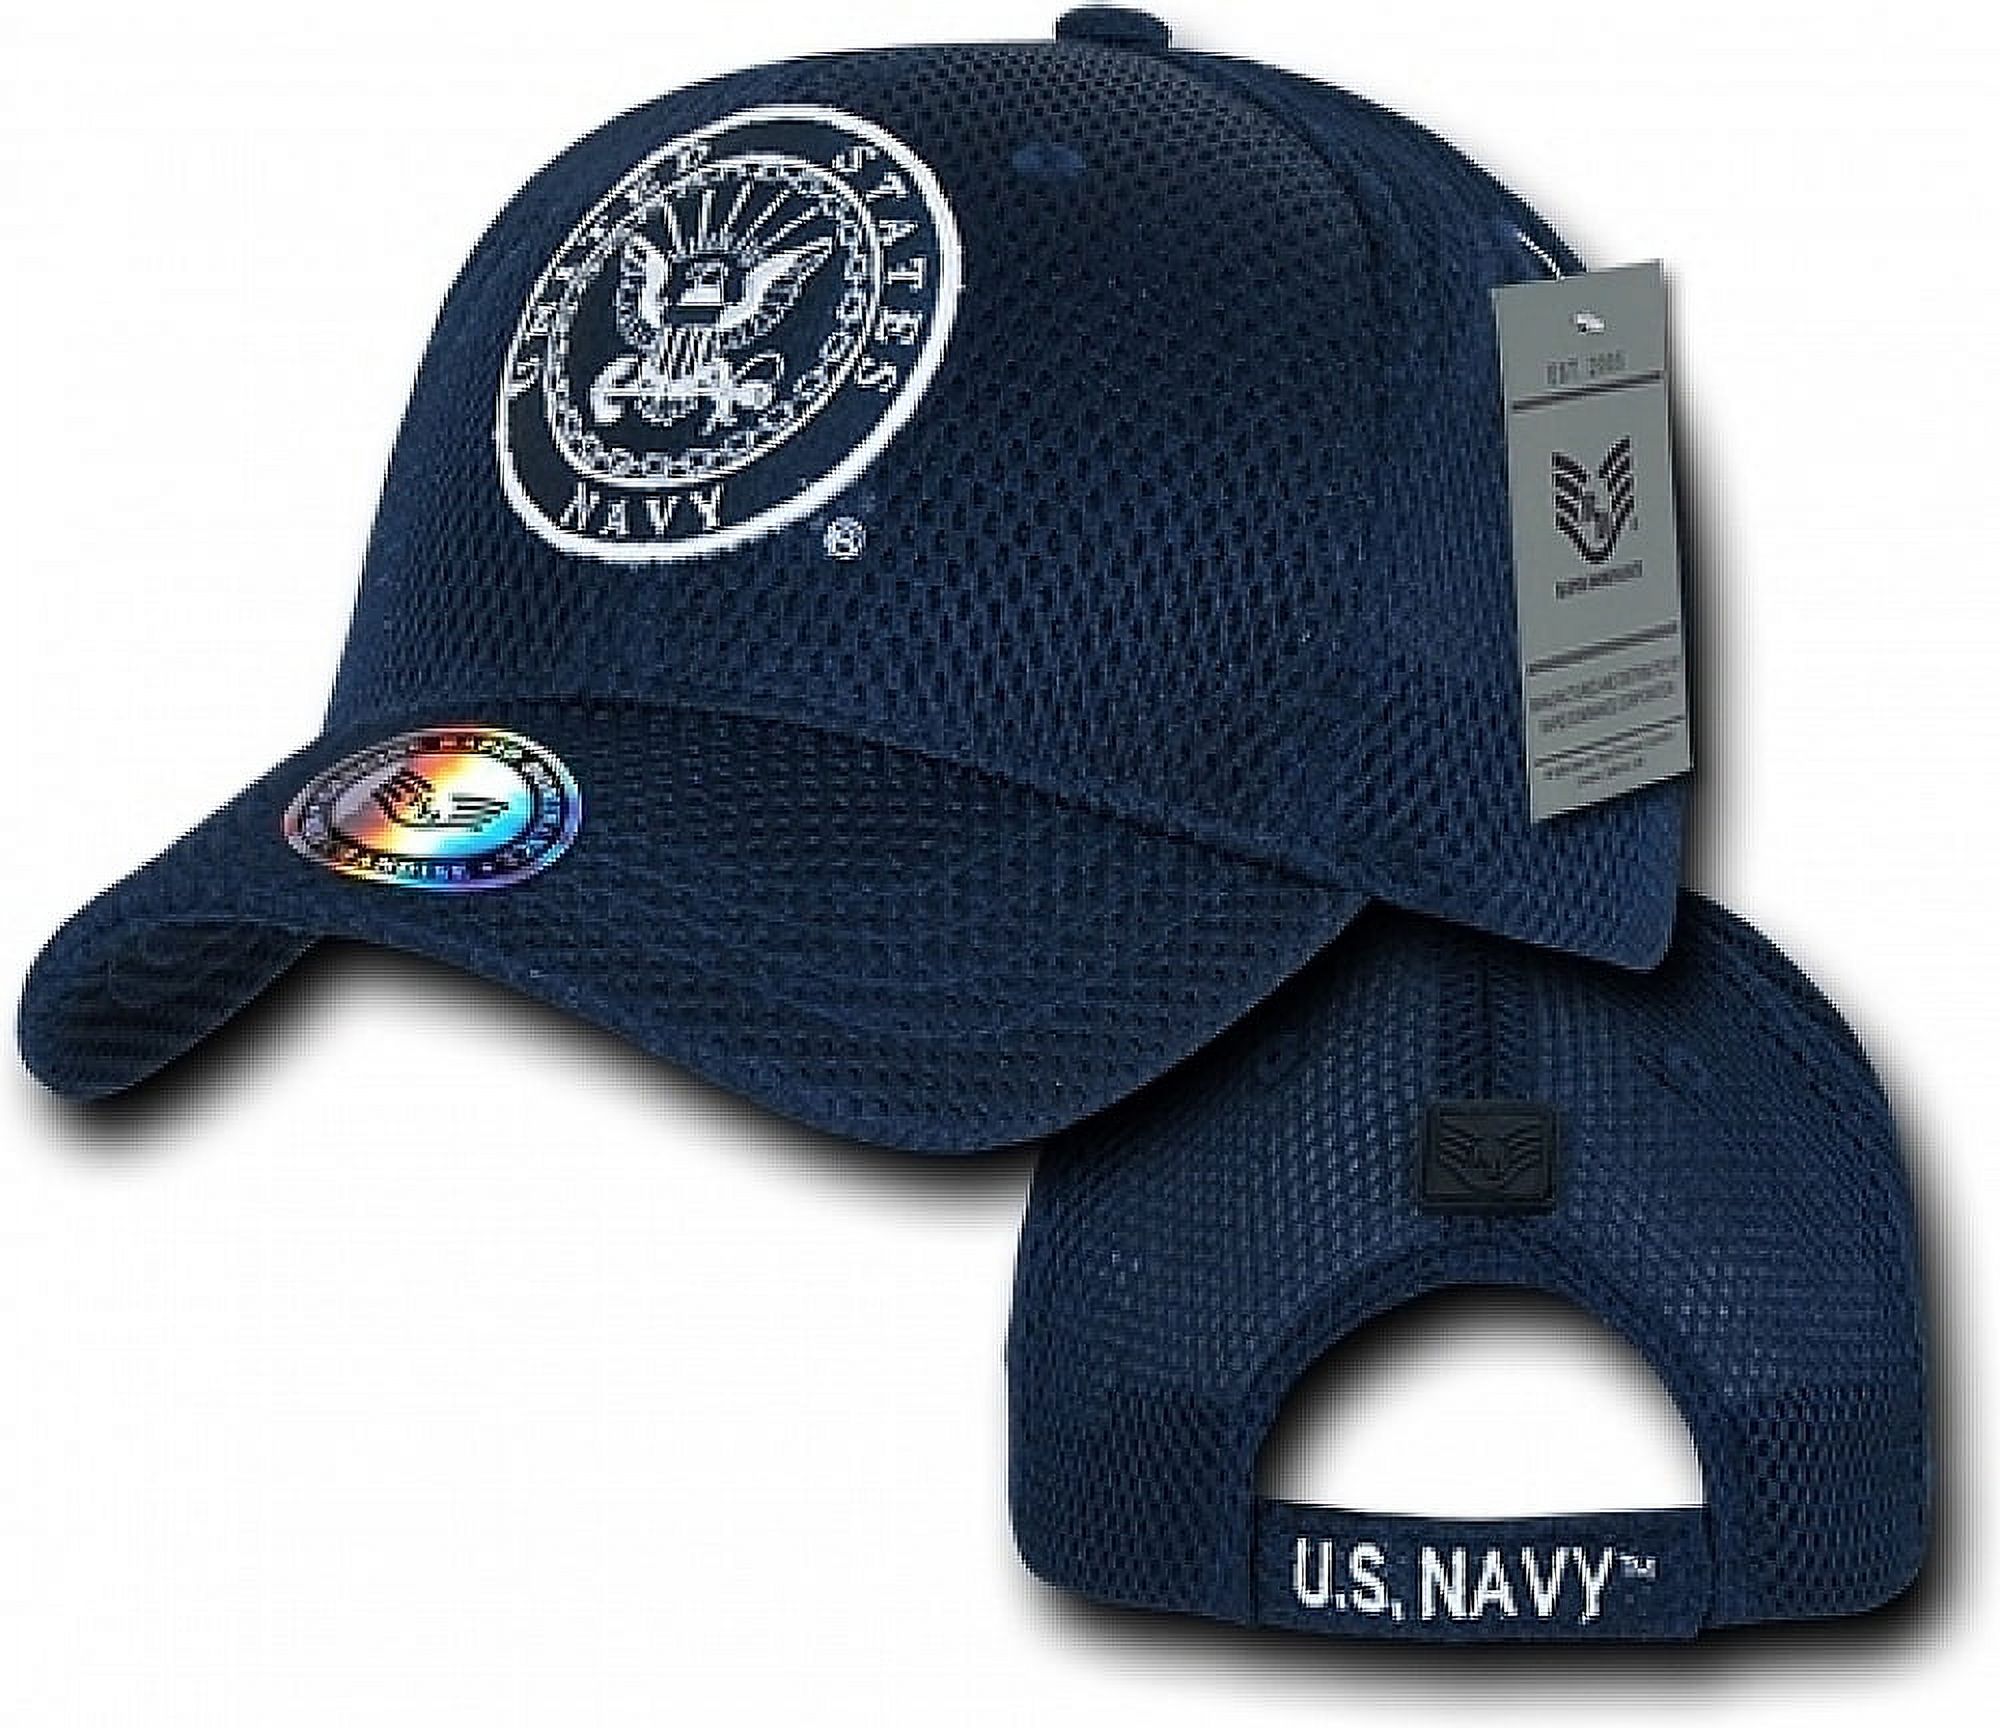 Rapid Dominance S002-NAVY-NVY Air Mesh Military Caps, Navy, Navy - image 2 of 2